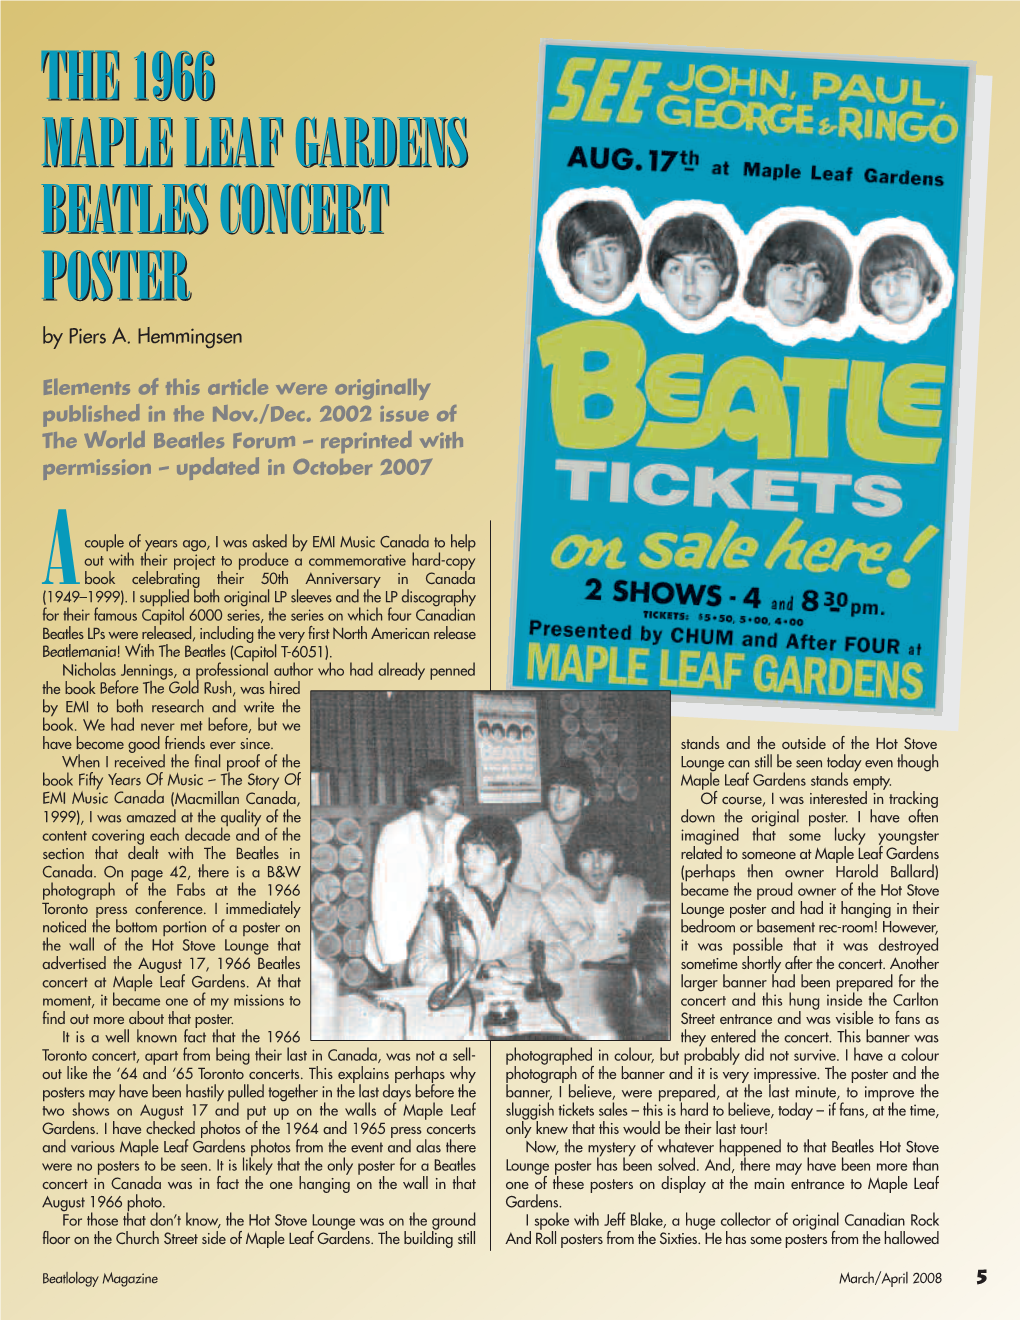 THE 1966 MAPLE LEAF GARDENS BEATLES CONCERT POSTER by Piers A